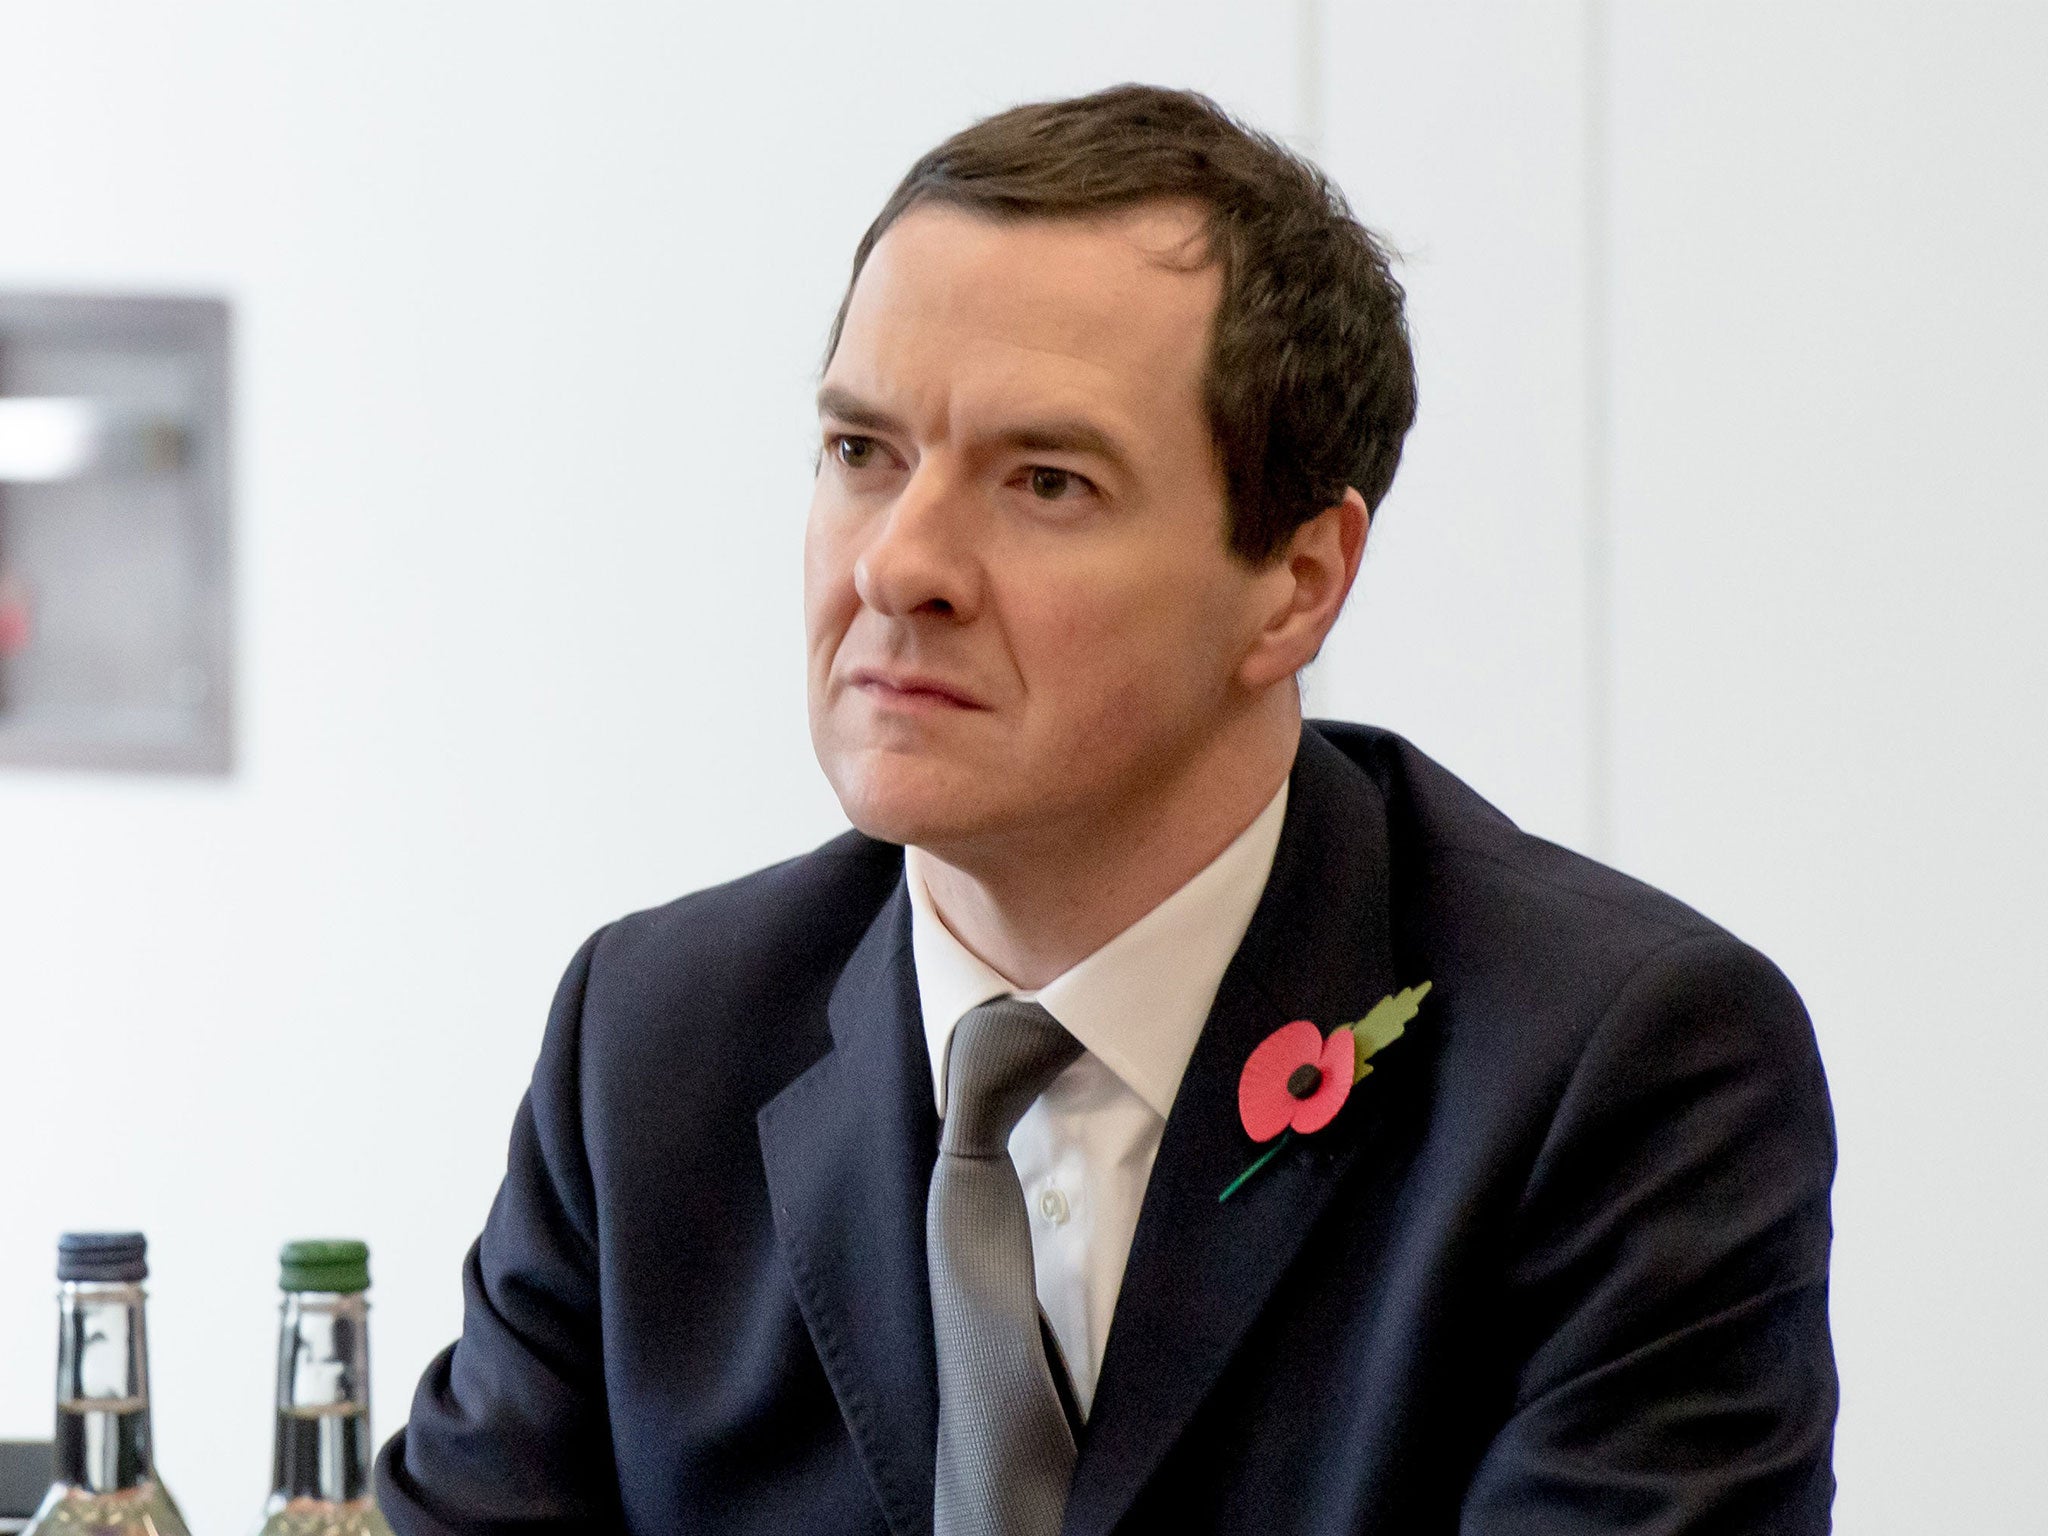 George Osborne has been accused of bullying